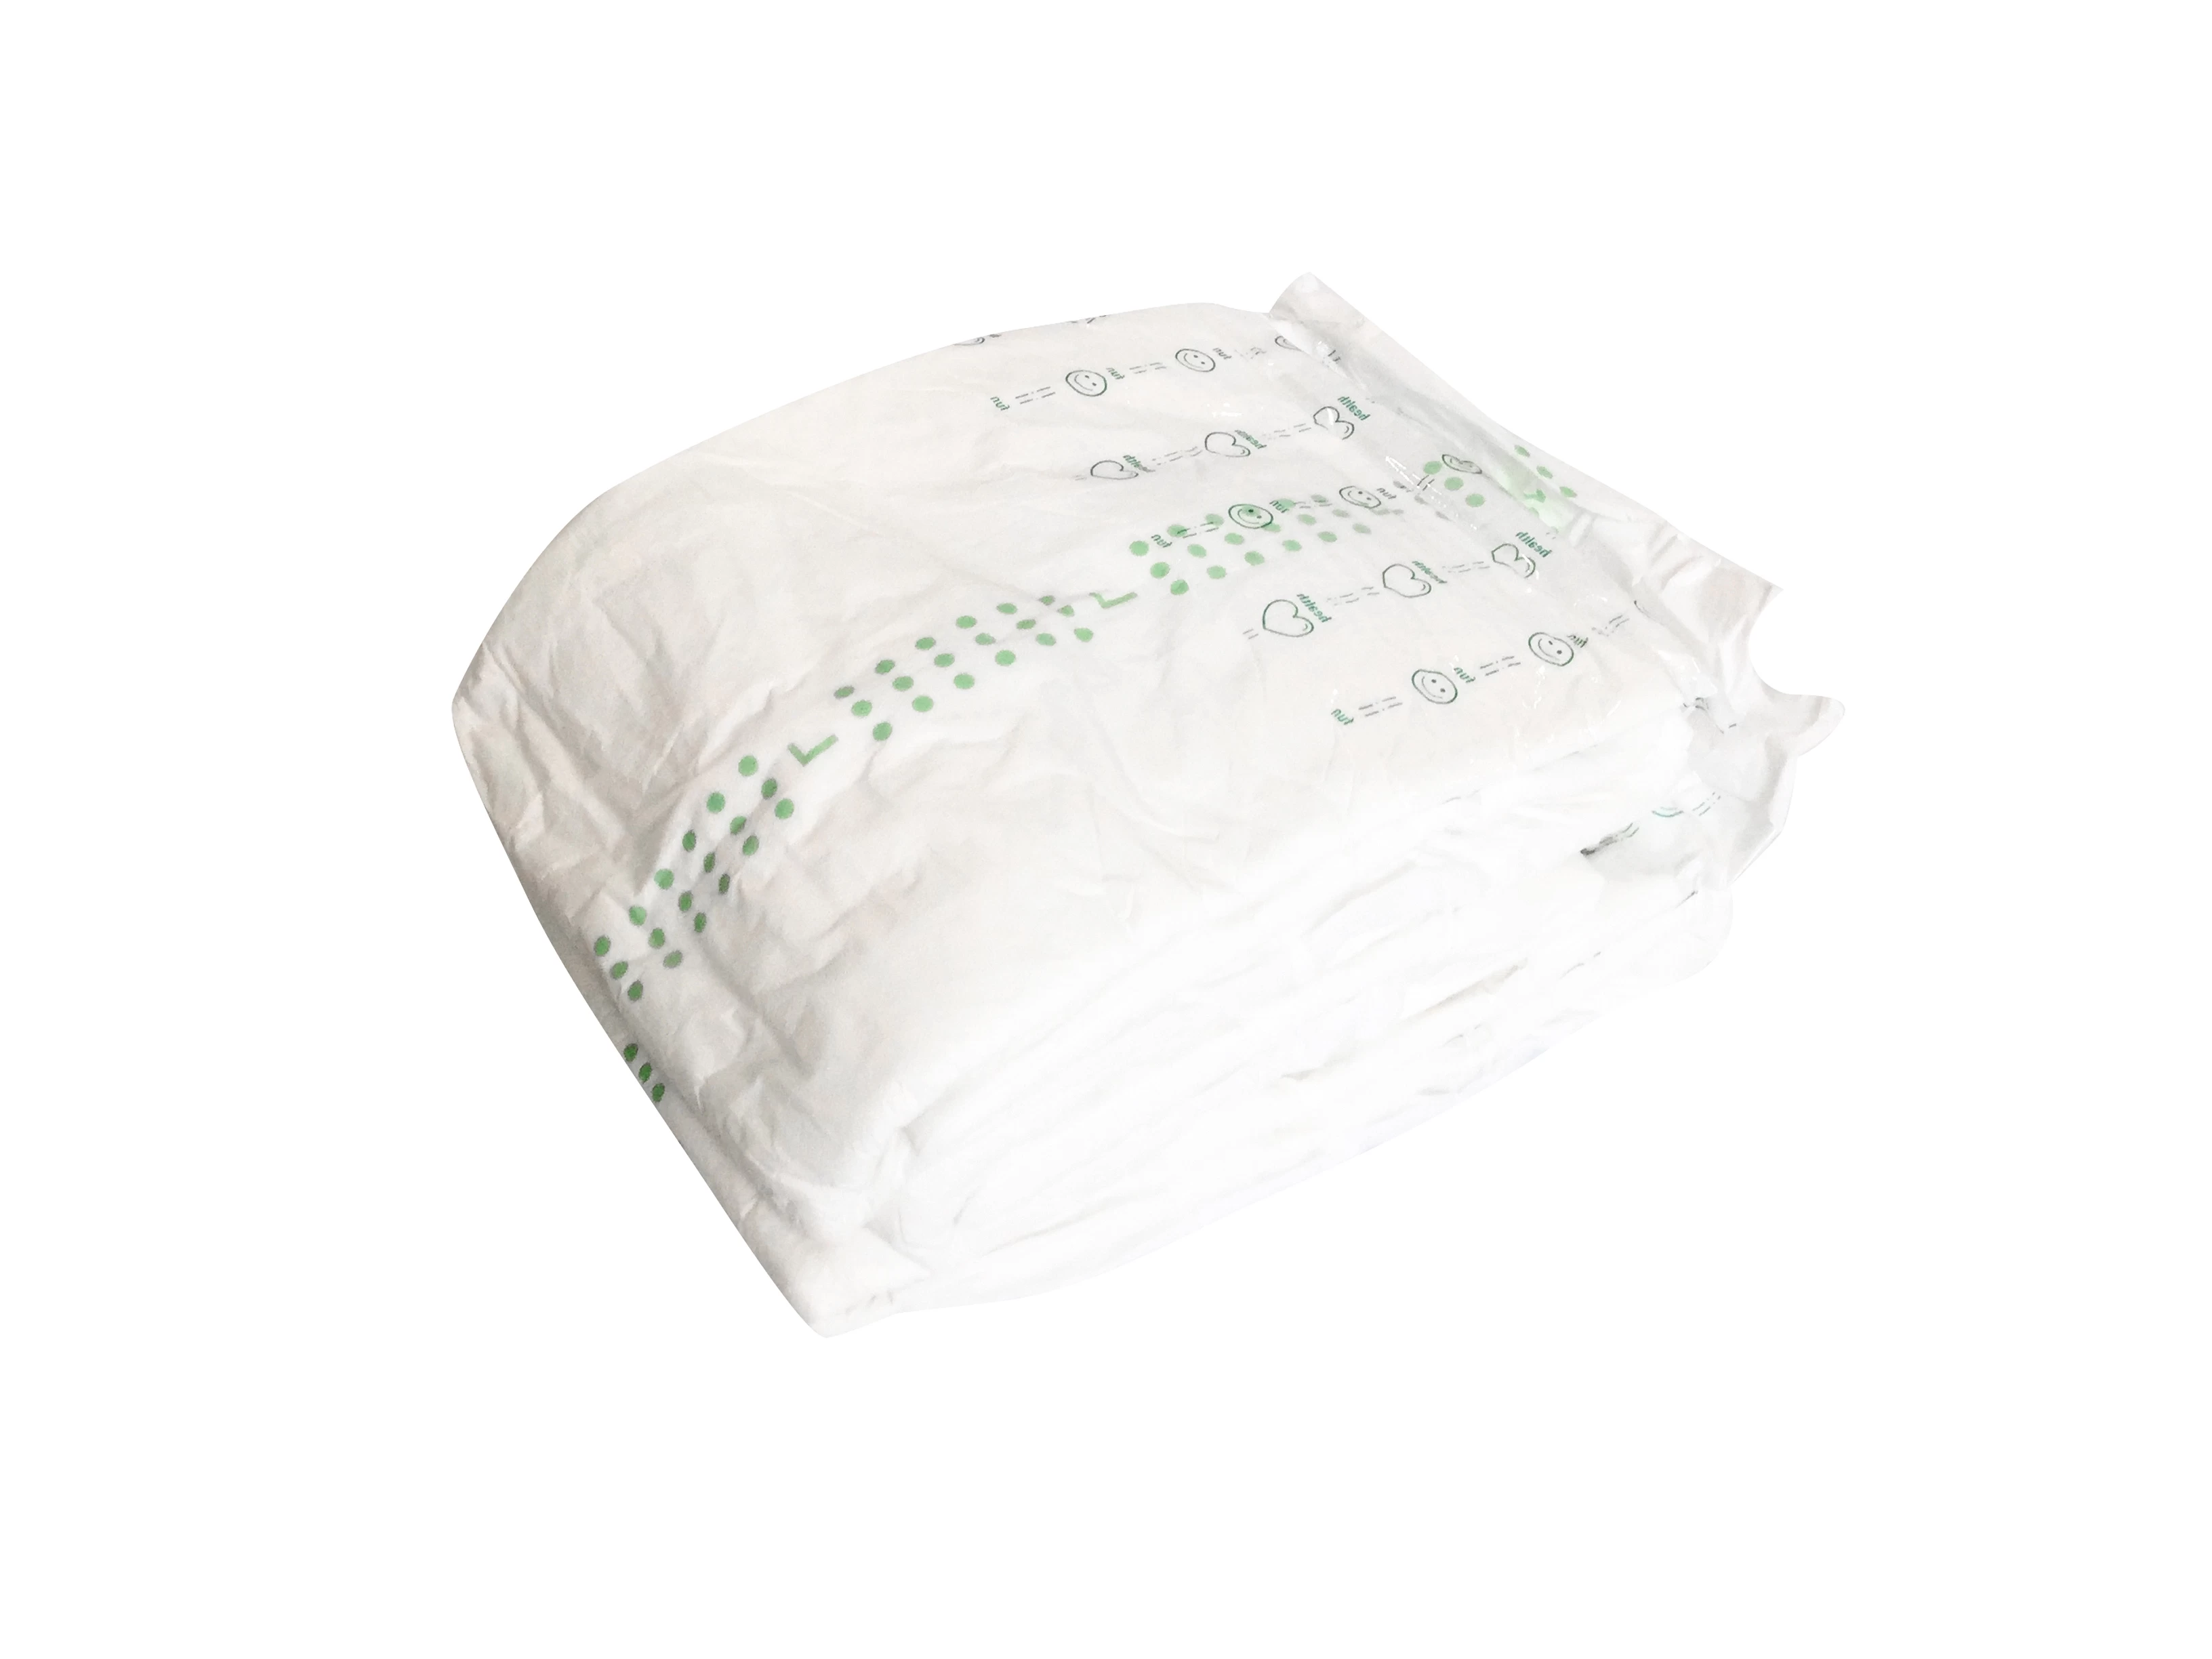 Full Soft Free Sample Disposable Adults Diapers